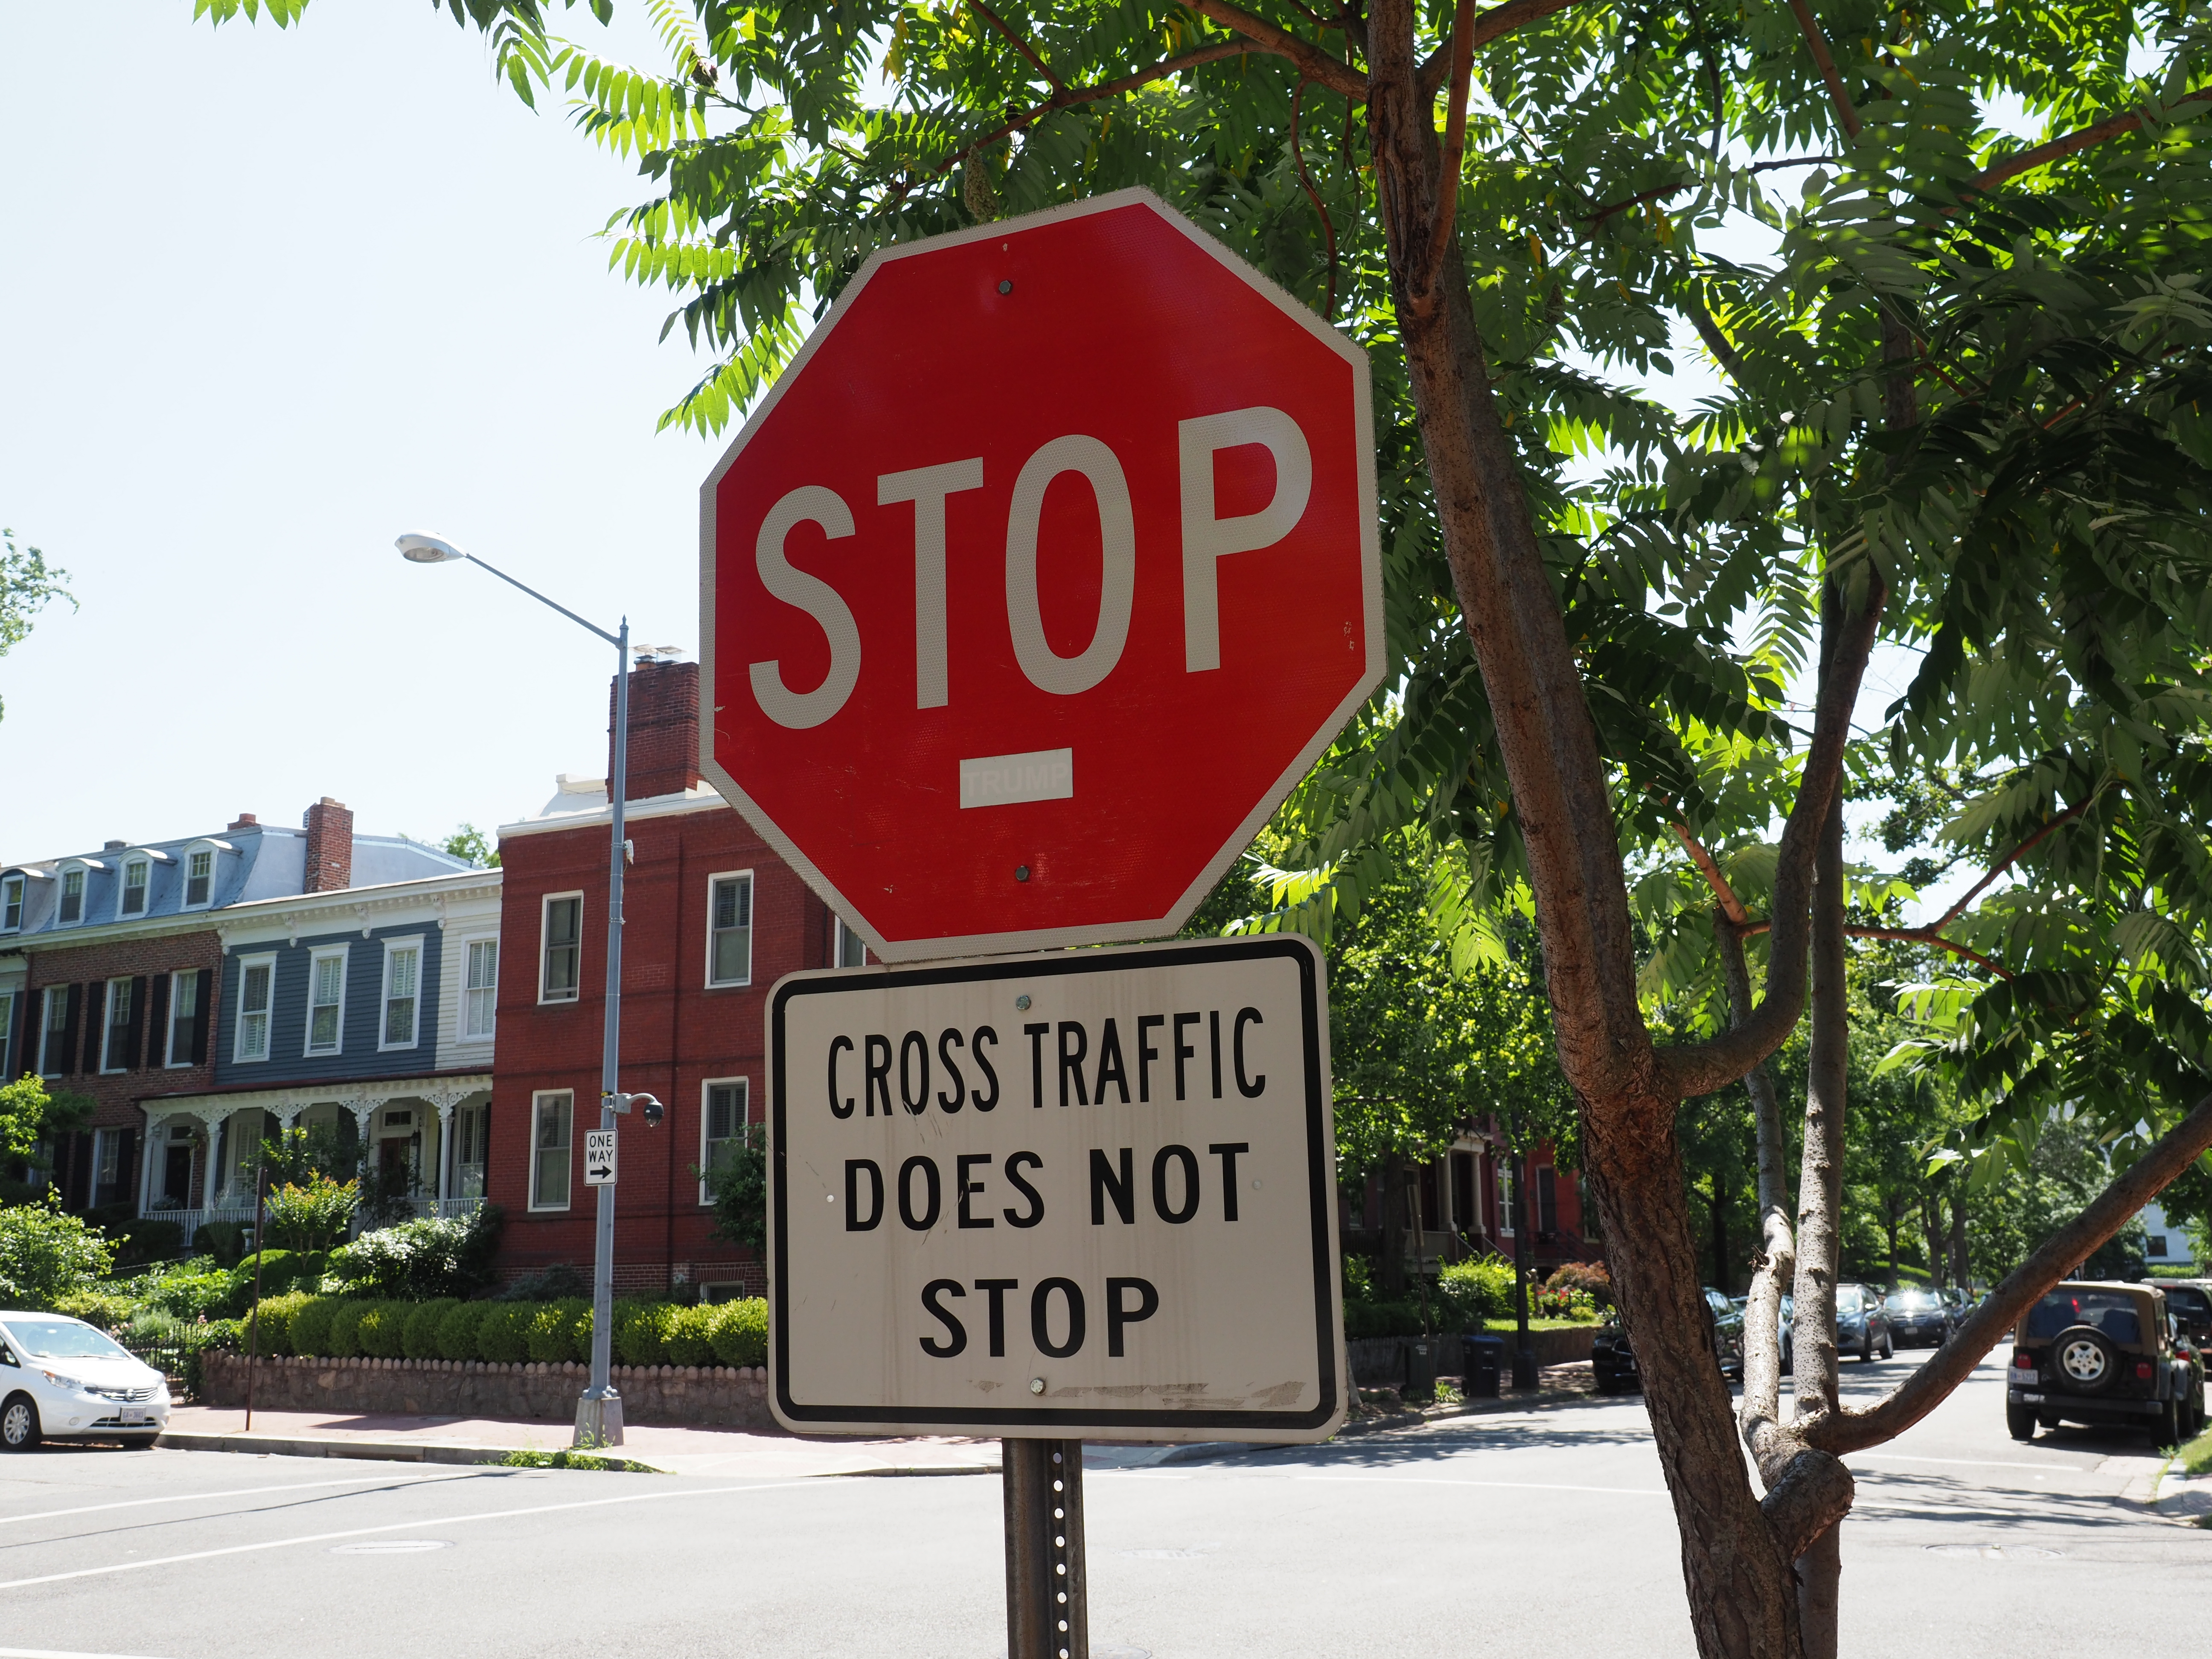 DC Lawmakers Seek to Close, Narrow Roads to Promote Social Distancing